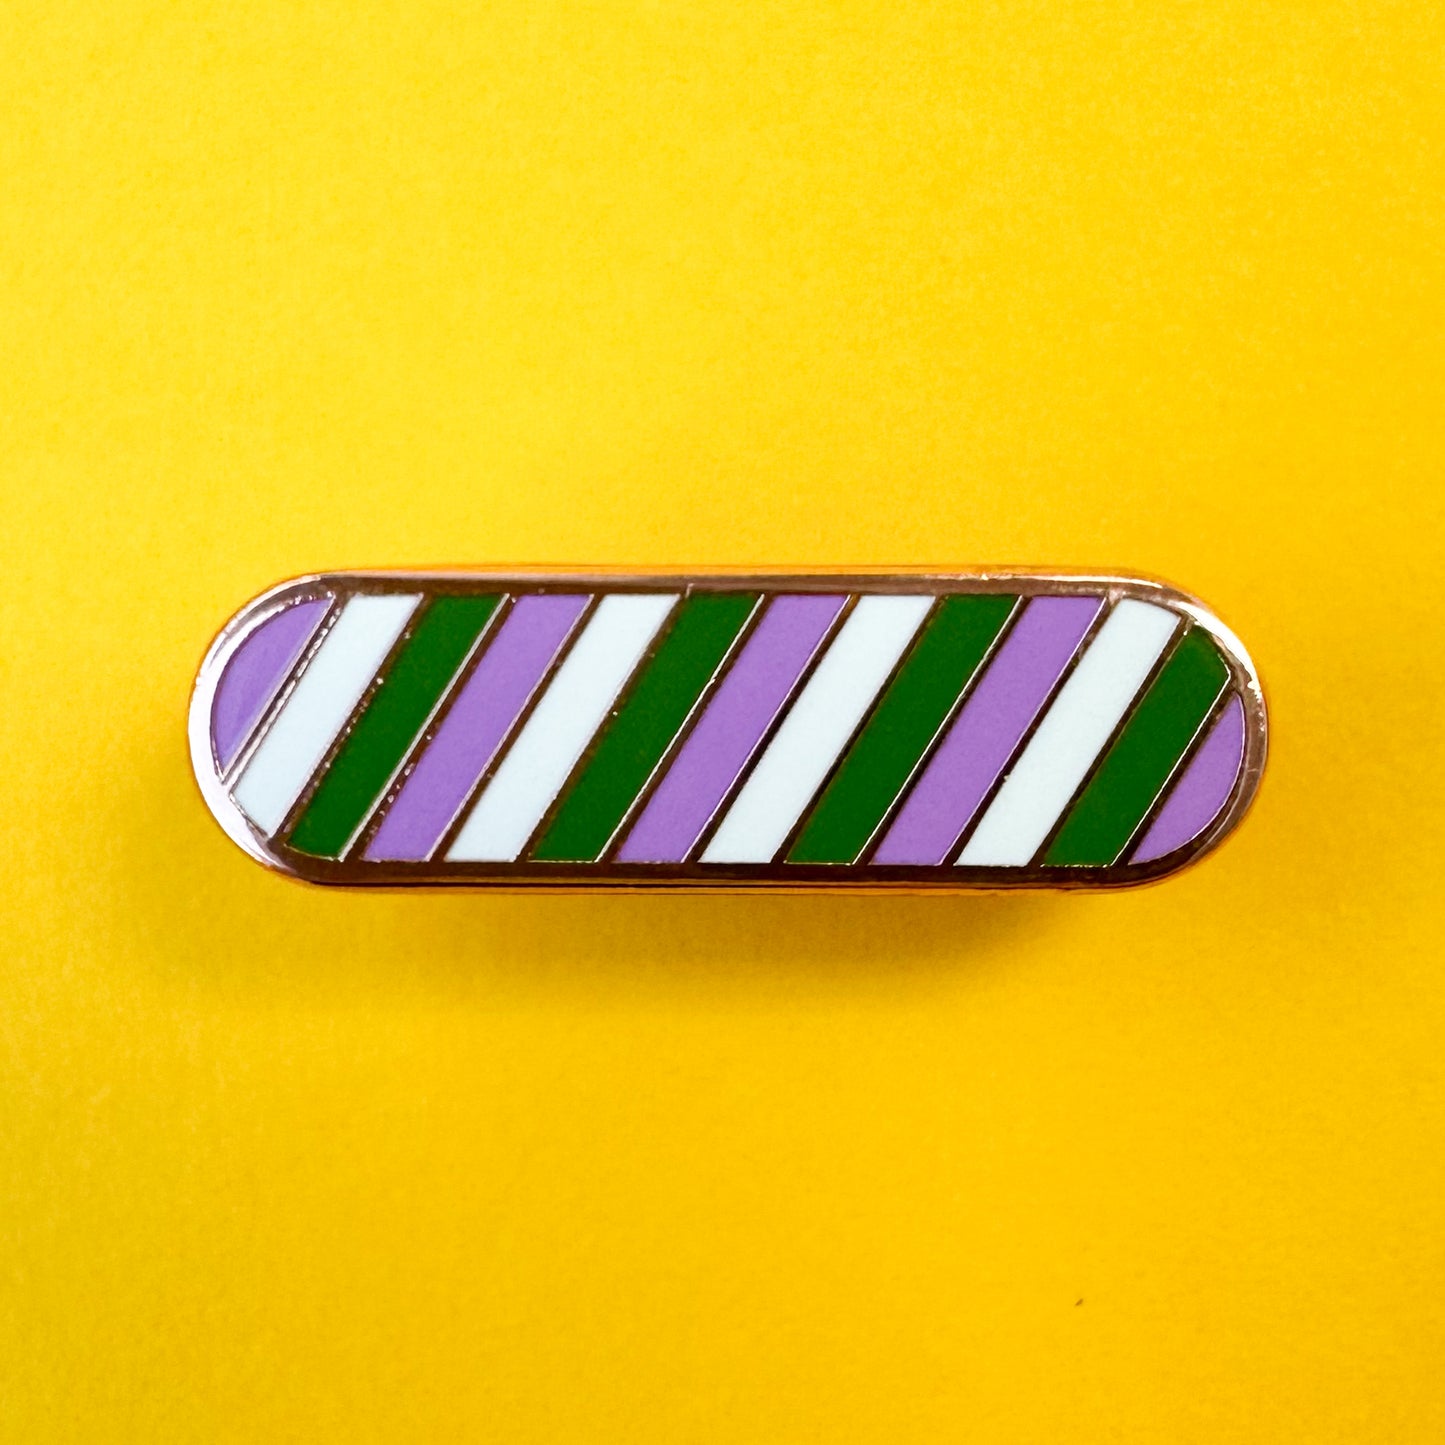 A genderqueer pride enamel pin in the shape of an oval on a yellow background. 